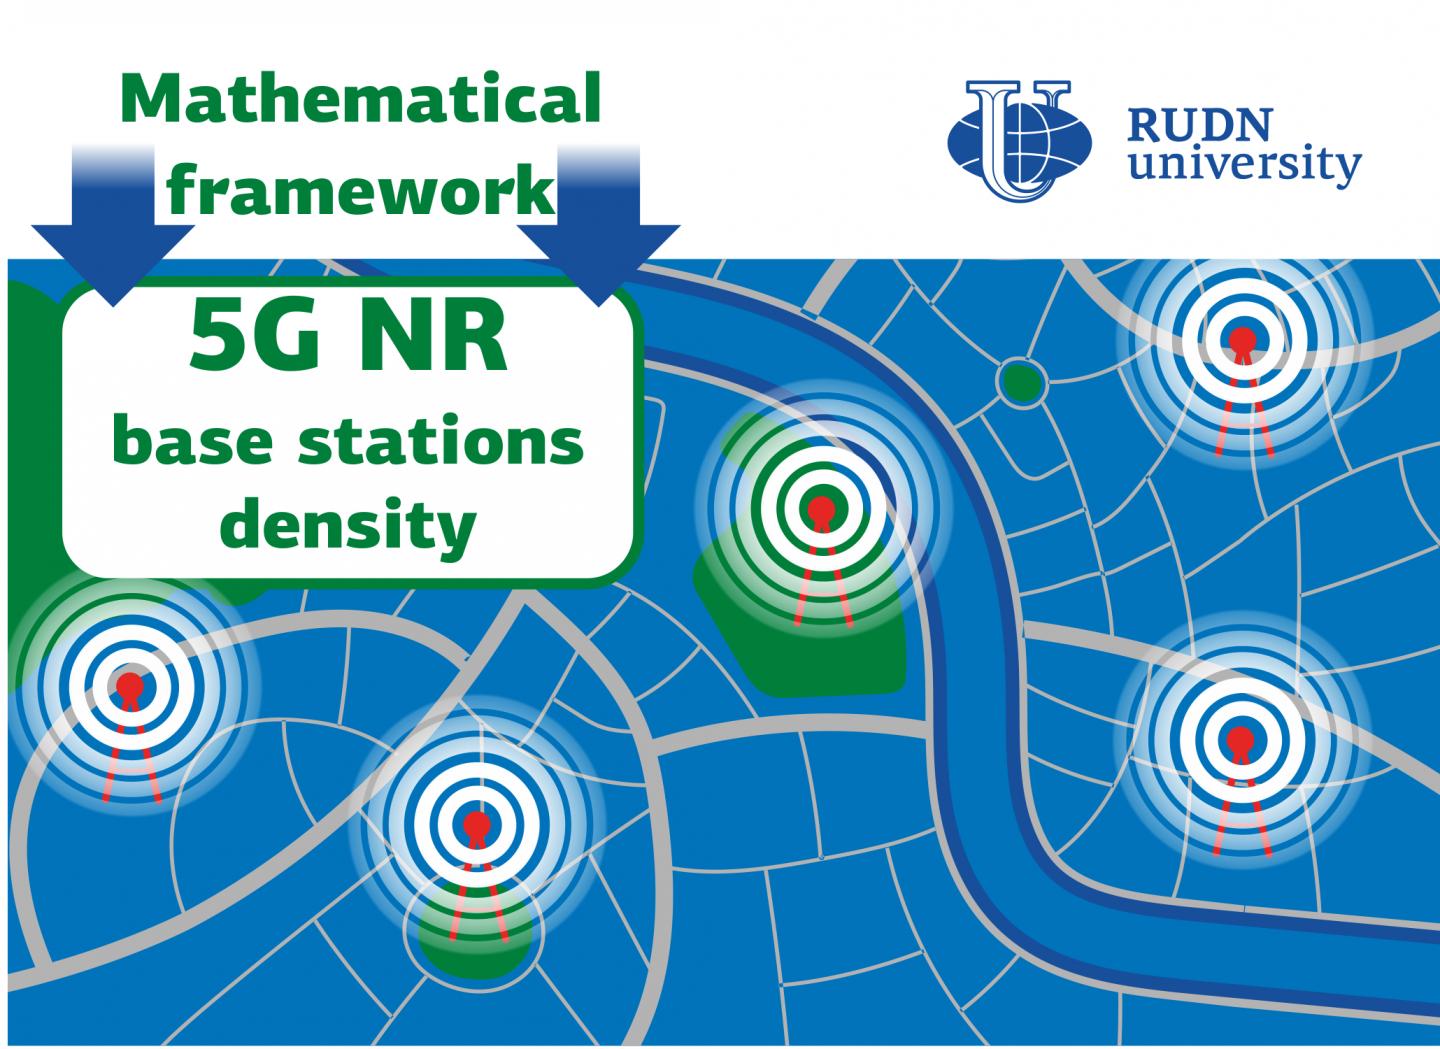 RUDN University Mathematicians Calculate the Density of 5G Stations for Any Network Requirements